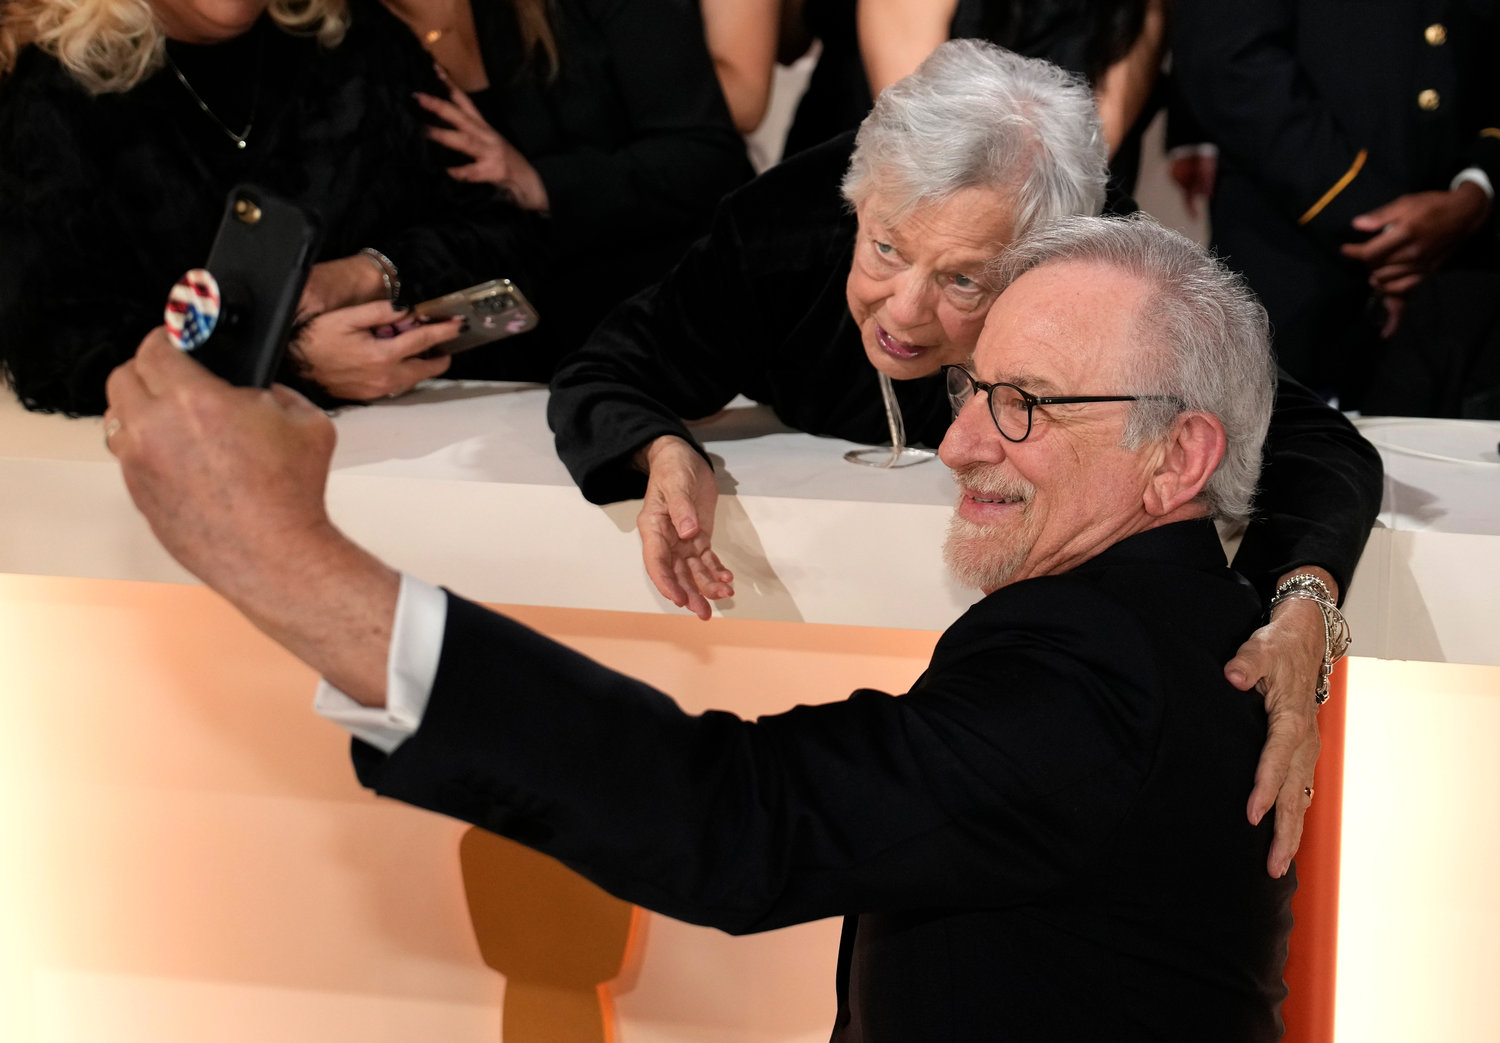 Steven Spielberg poses for a selfie with fan on carpet at the Oscars on Sunday, March 12, 2023, at the Dolby Theatre in Los Angeles. (AP Photo/John Locher)